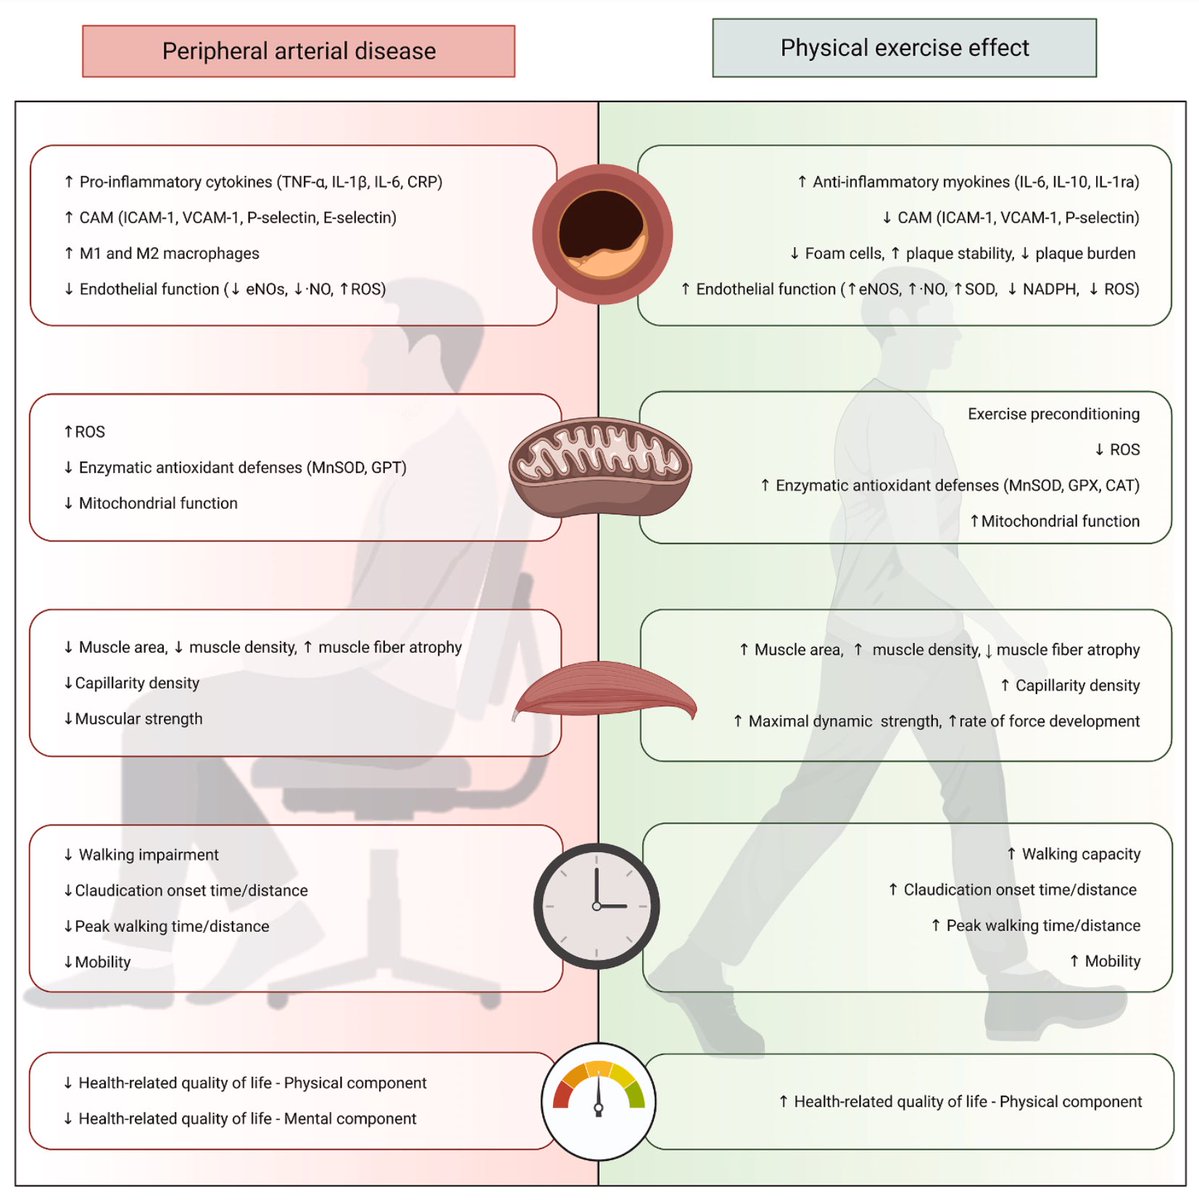 Physical exercise improves the major hallmarks of peripheral arterial disease… sciencedirect.com/science/articl…